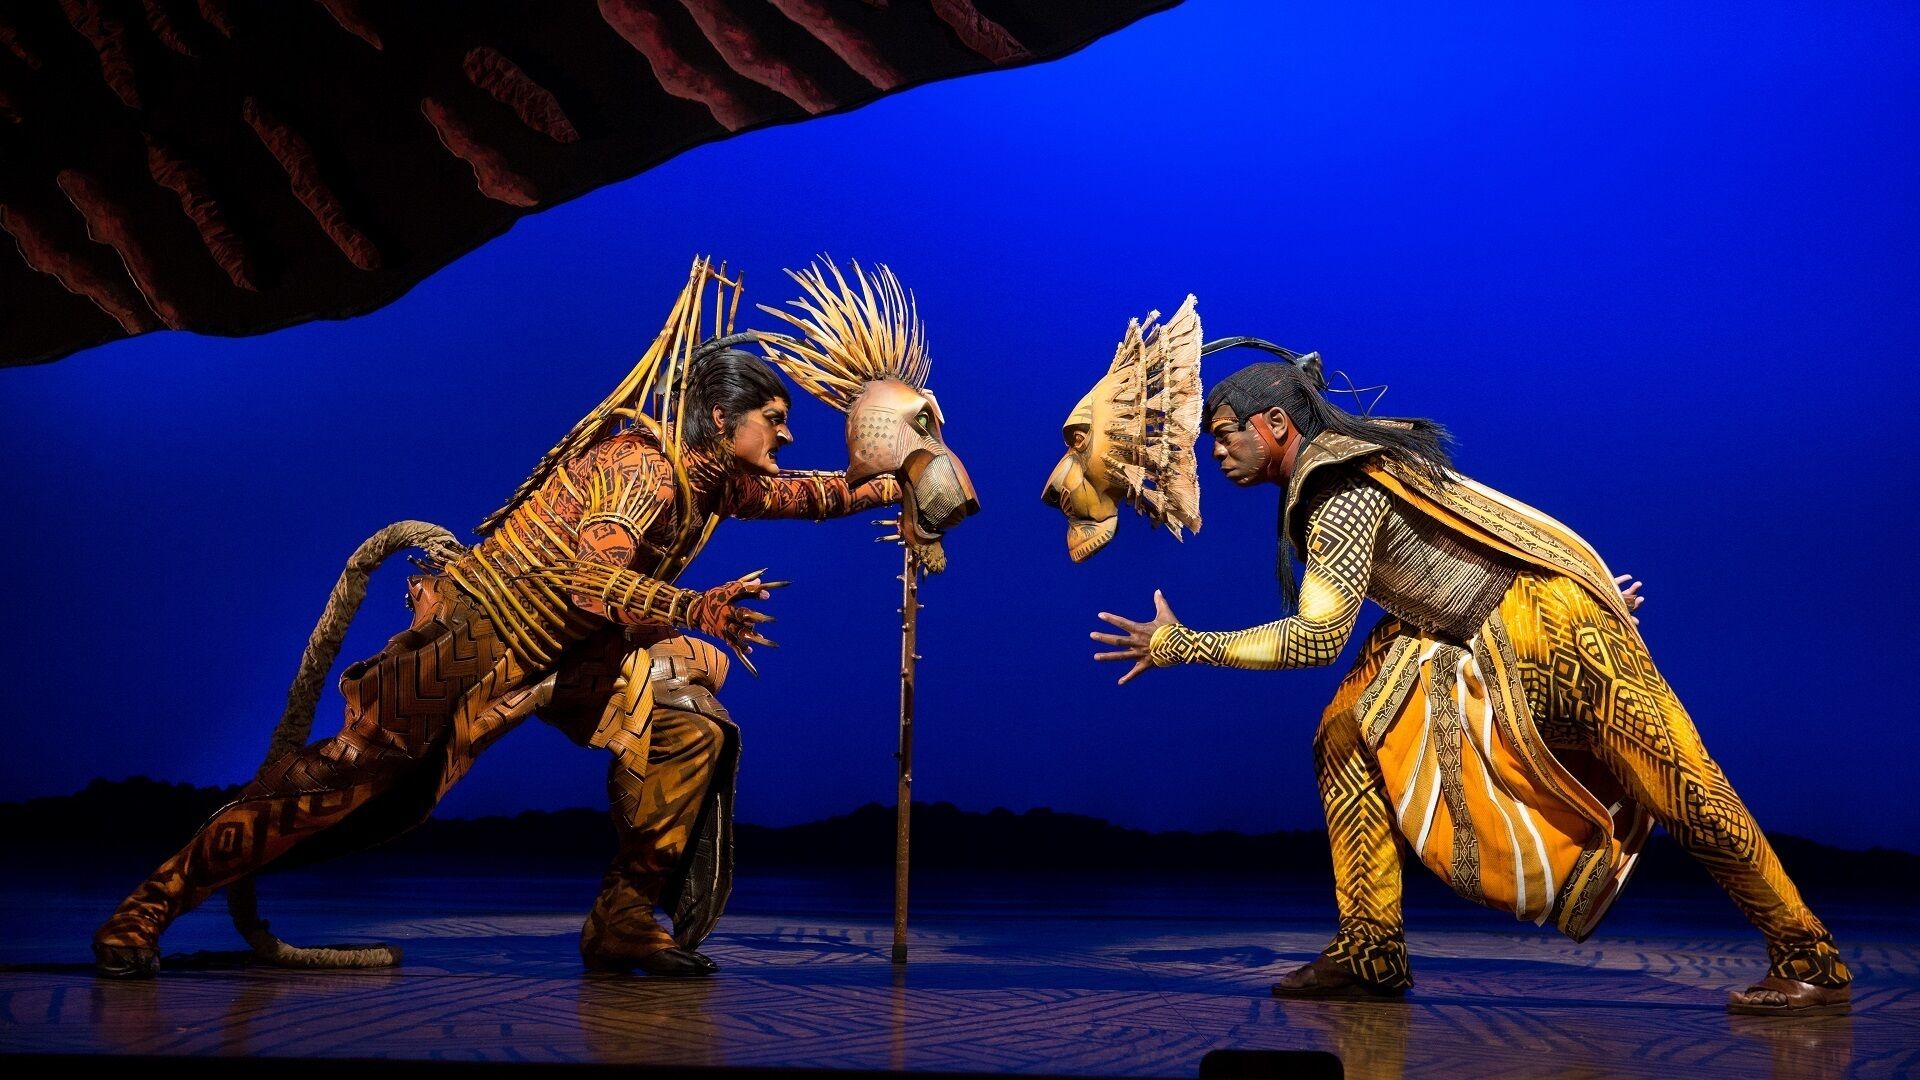 download the lion king broadway promo code